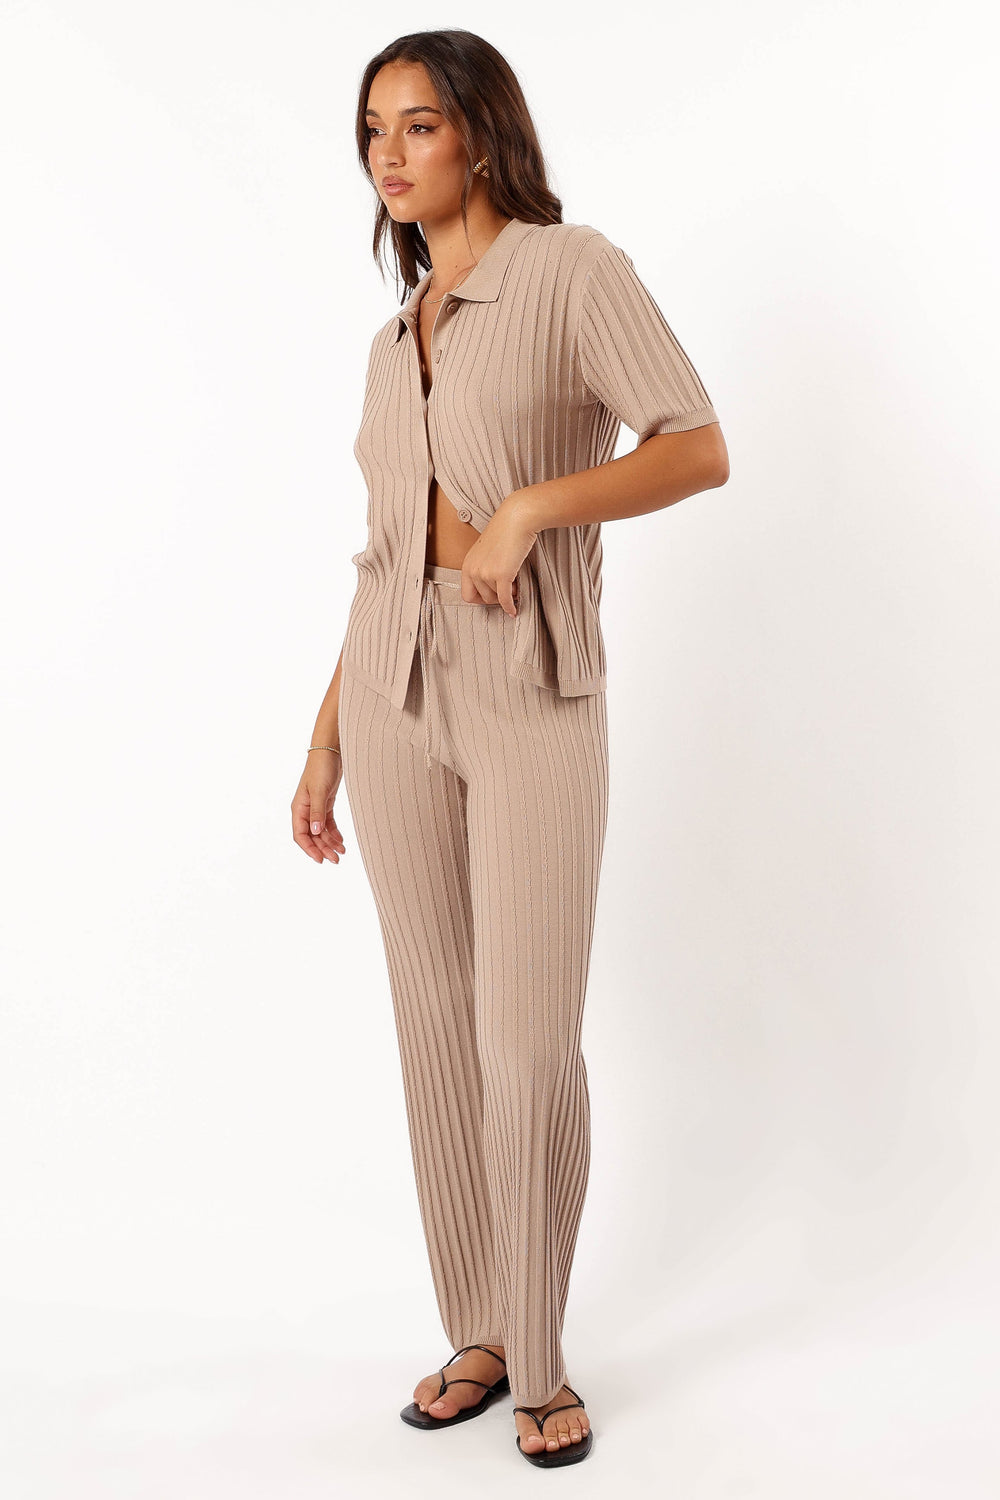 BOTTOMS @Tibi Ribbed Pant - Beige (Hold for Cool Beginnings)